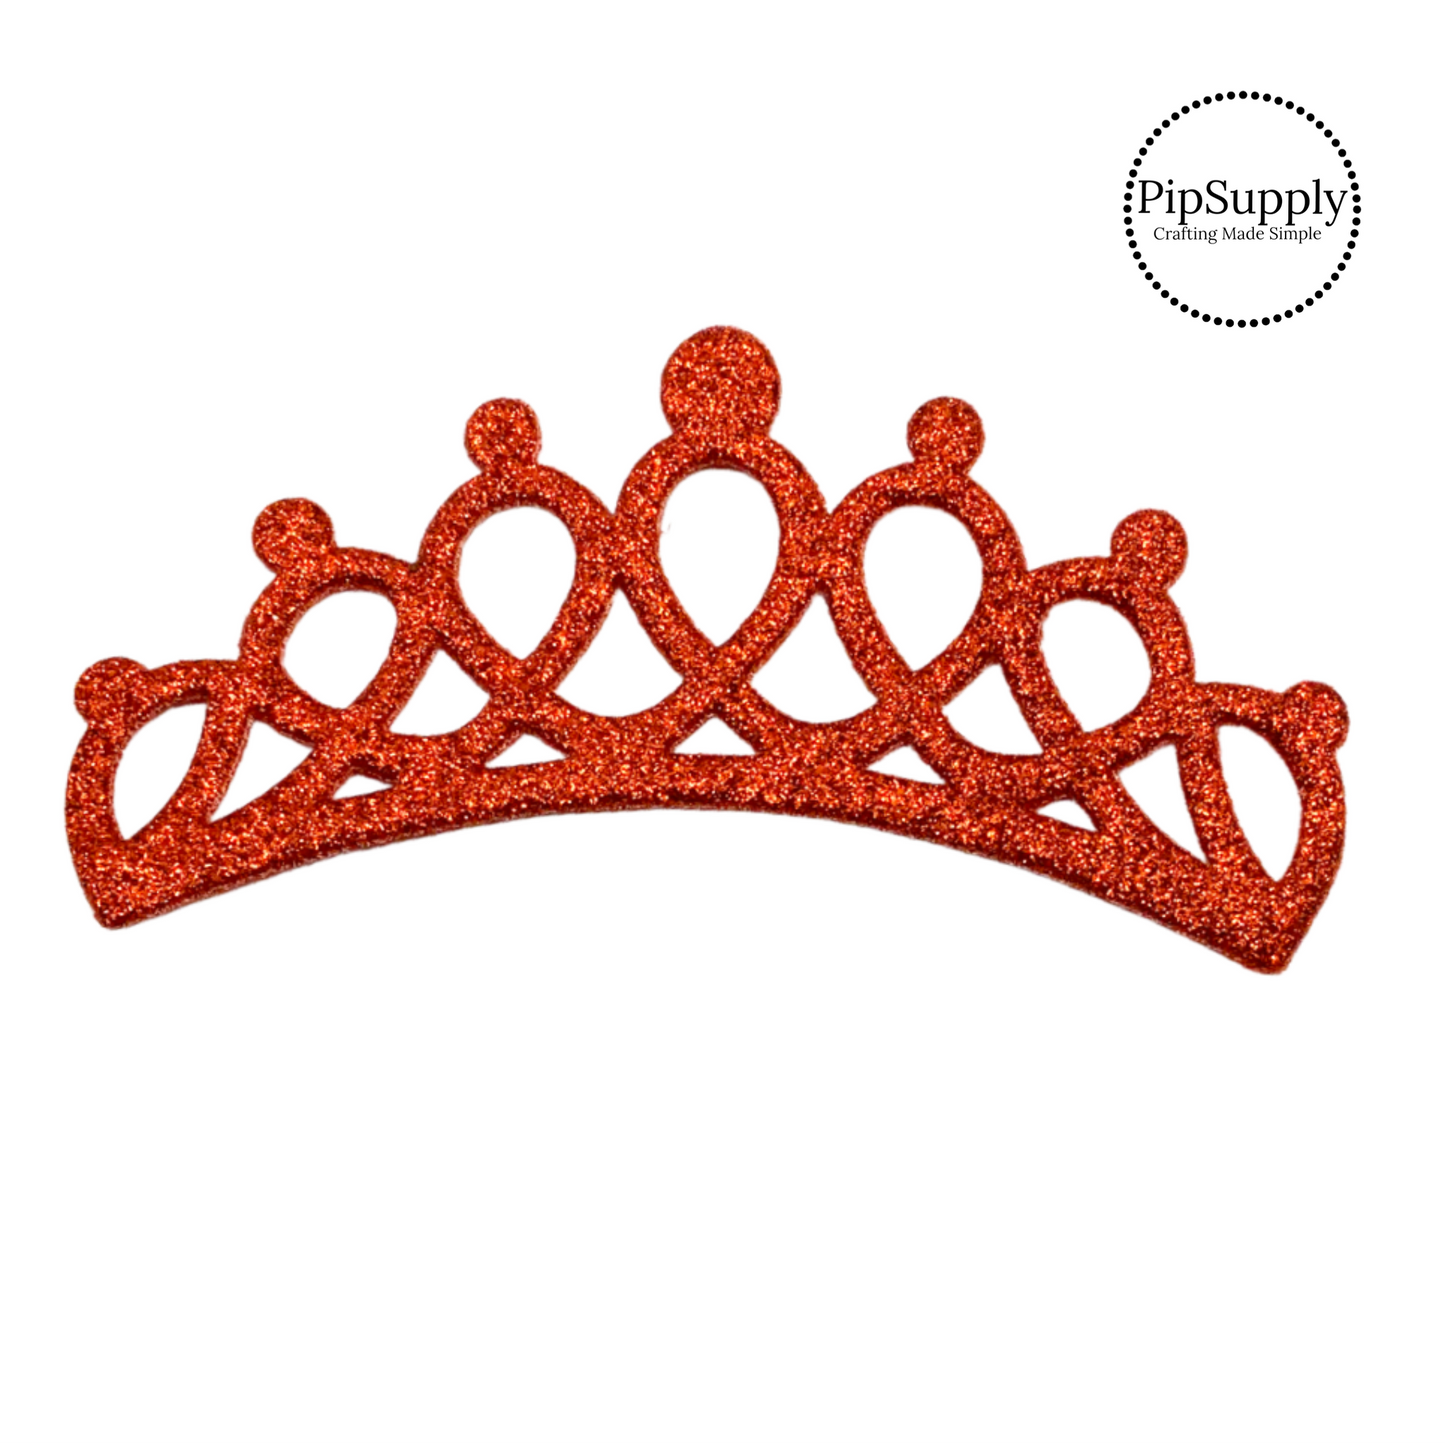 Iridescent red glitter chunky princess crown